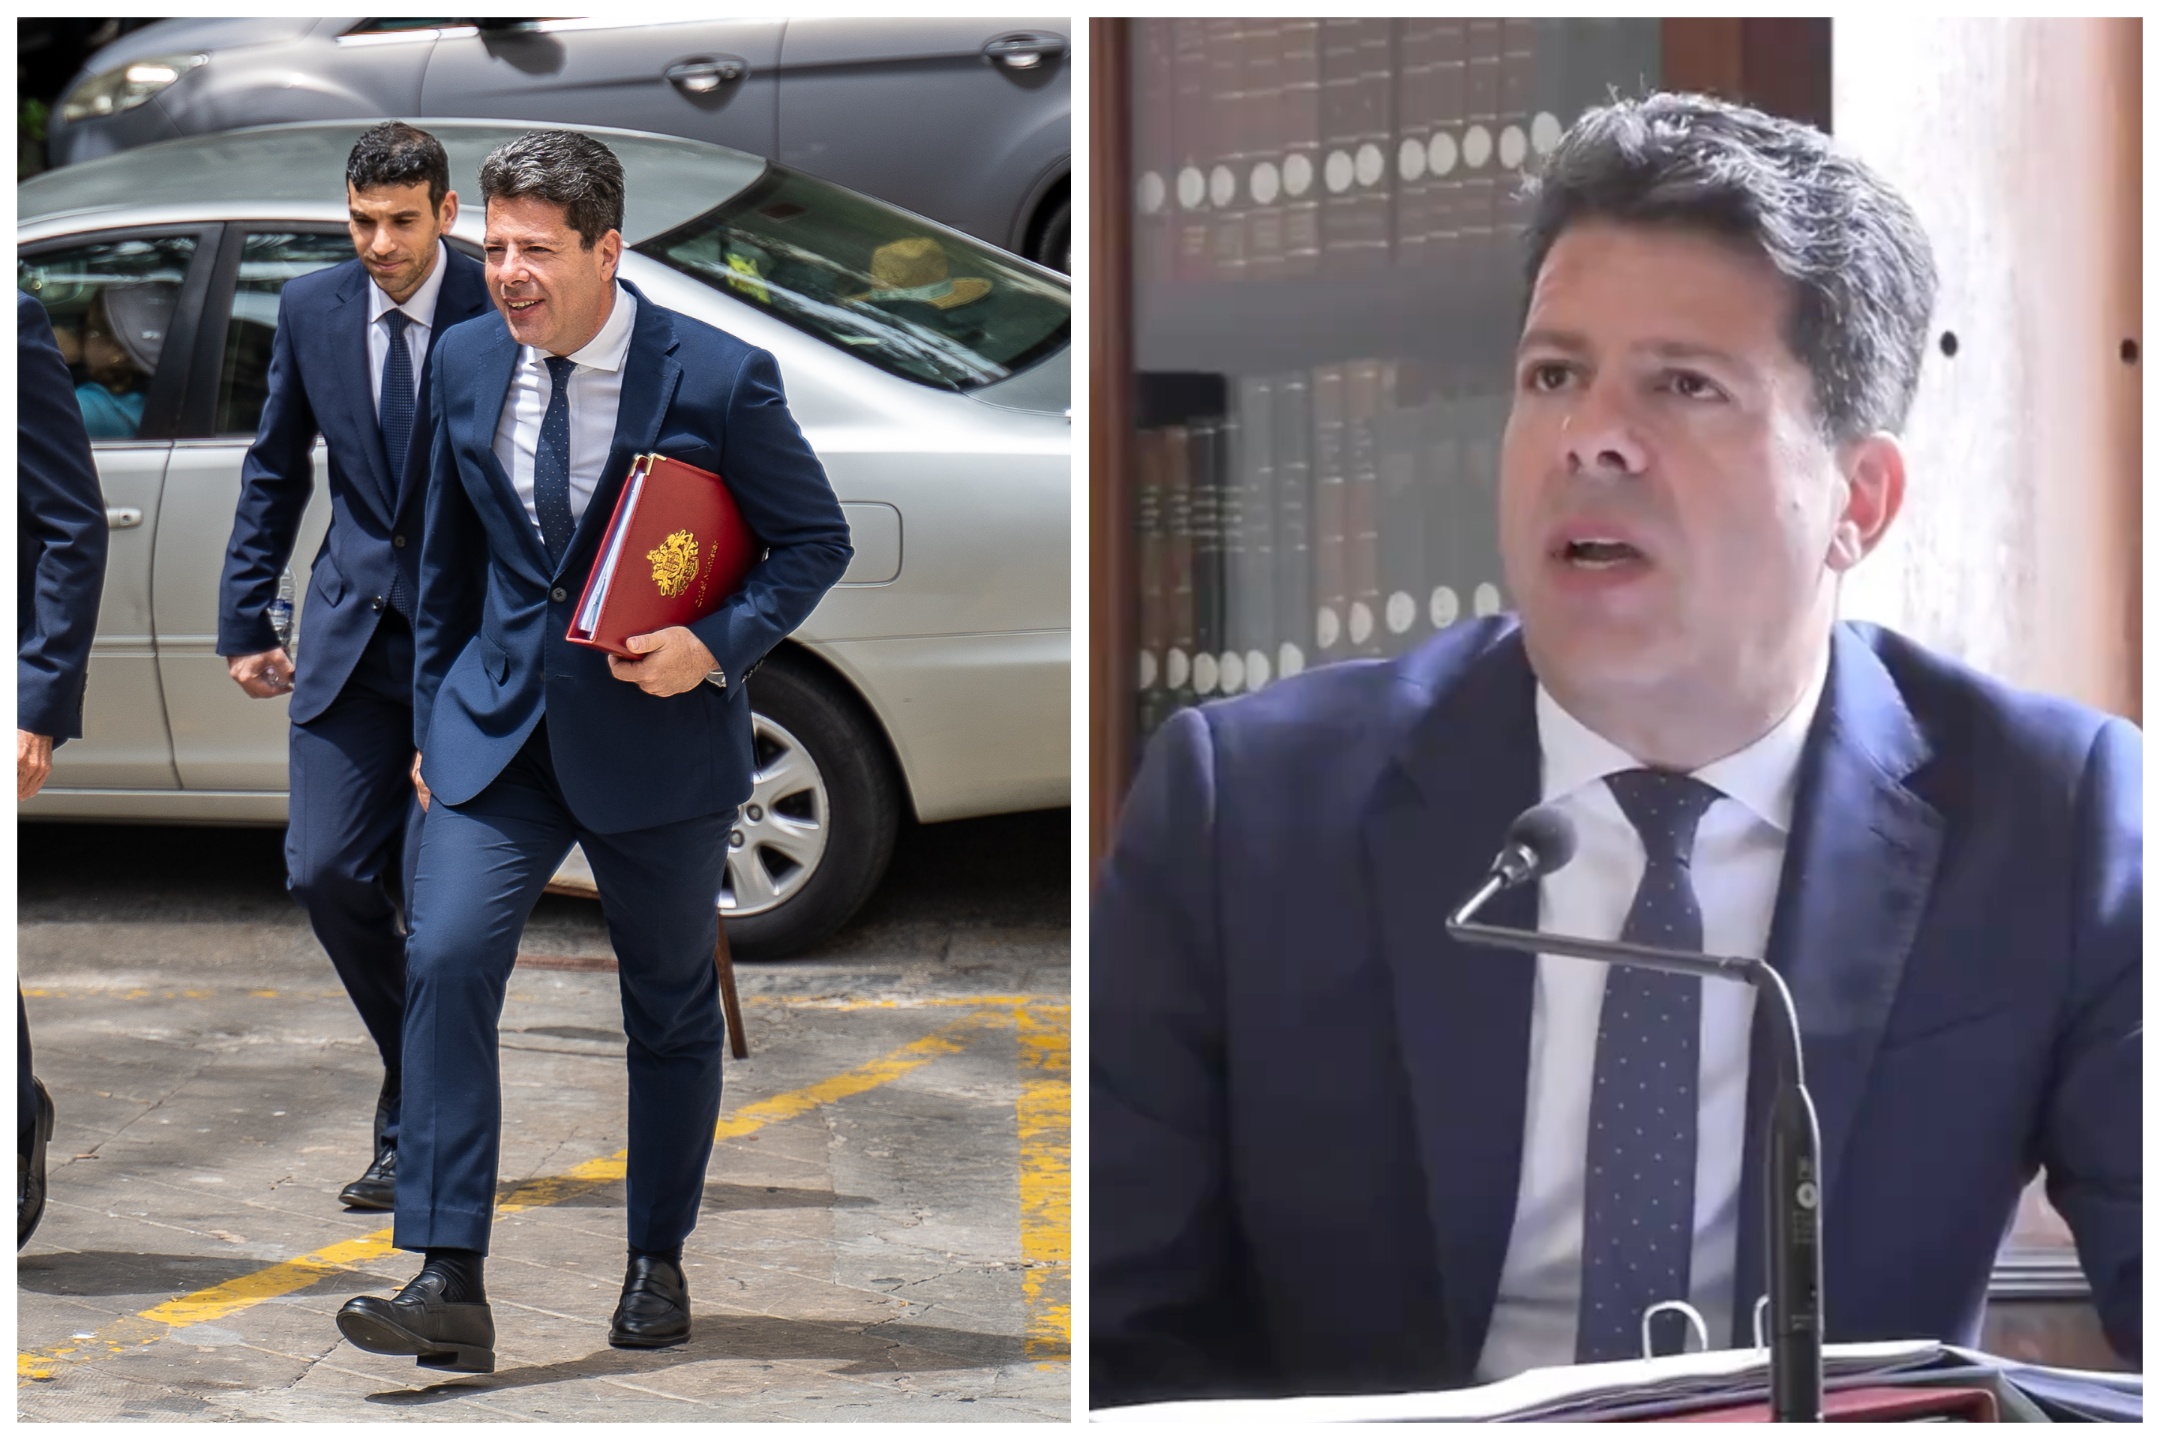 MCGRAIL INQUIRY: Fabian Picardo says he acted ‘selflessly’ and ‘in the tax payer’s best interest’ to support Gibraltar’s ‘biggest rain maker’ – and insists he never broke the ministerial code 